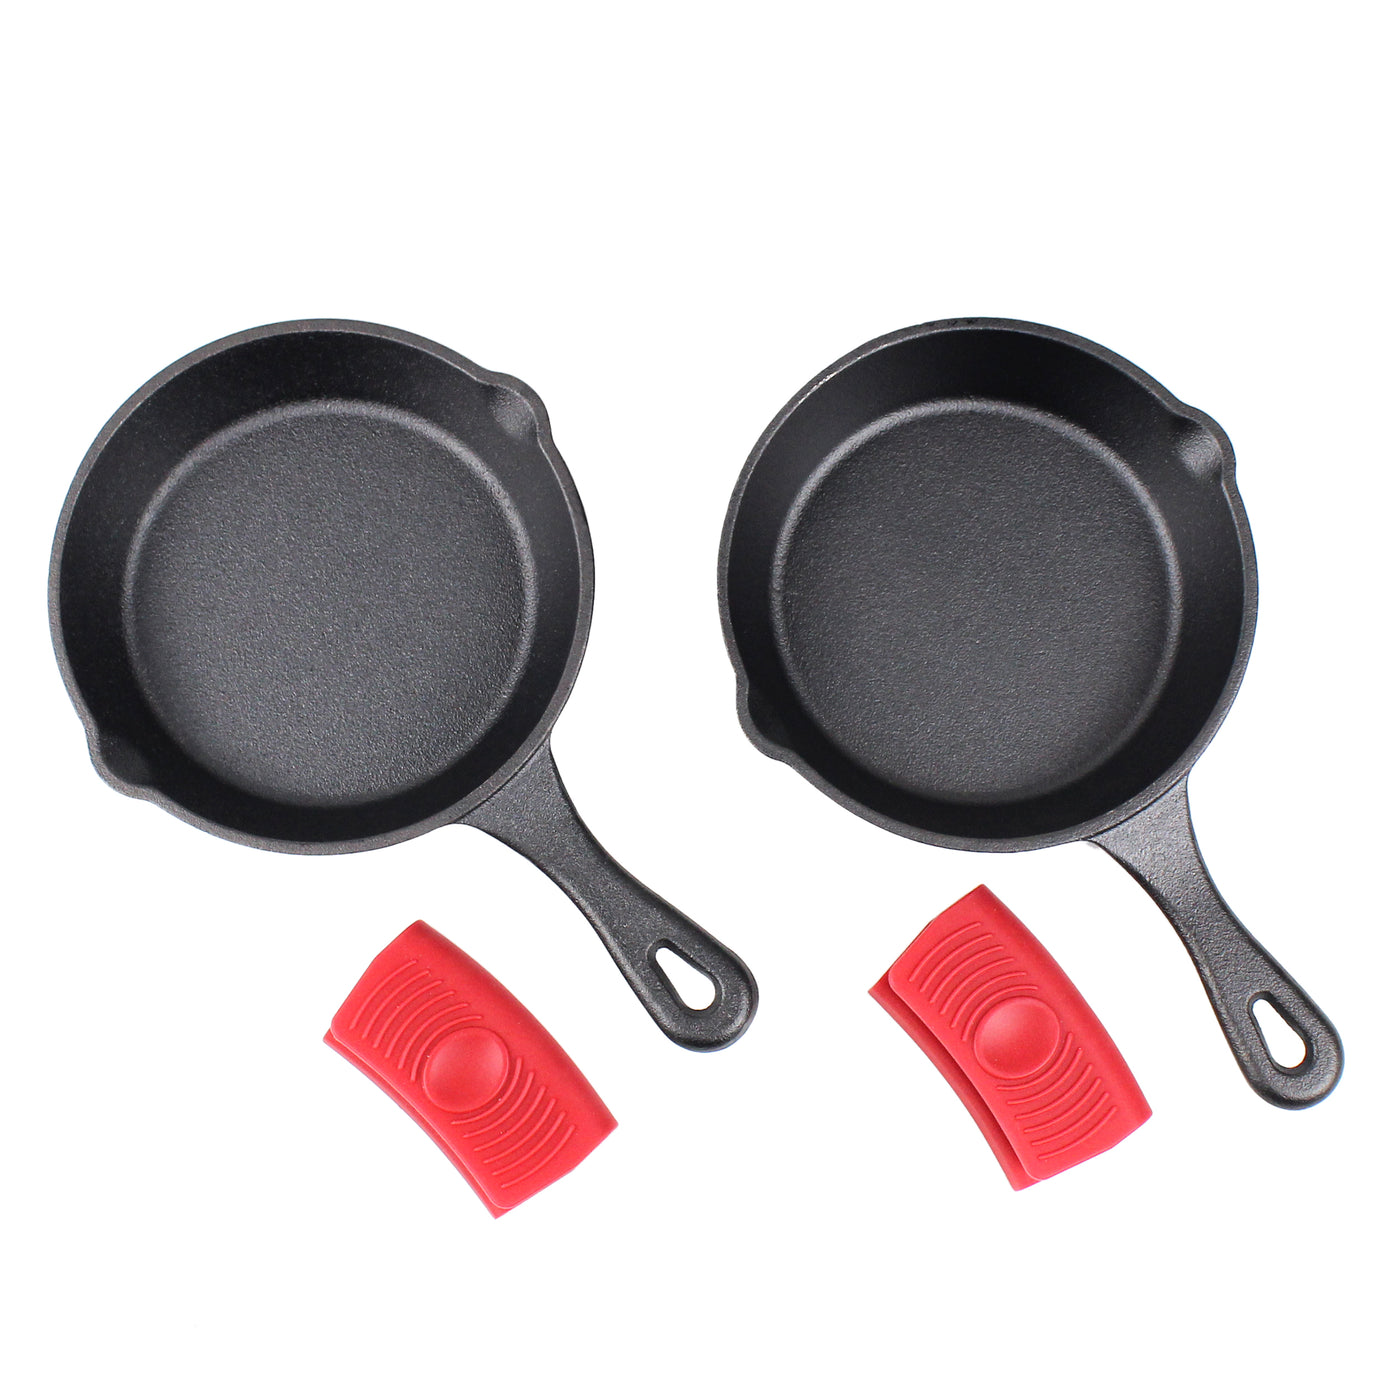 6"-Inch (15 cm) Cast Iron Skillet Set of 2 with 2 Silicon Handle Holder Grips